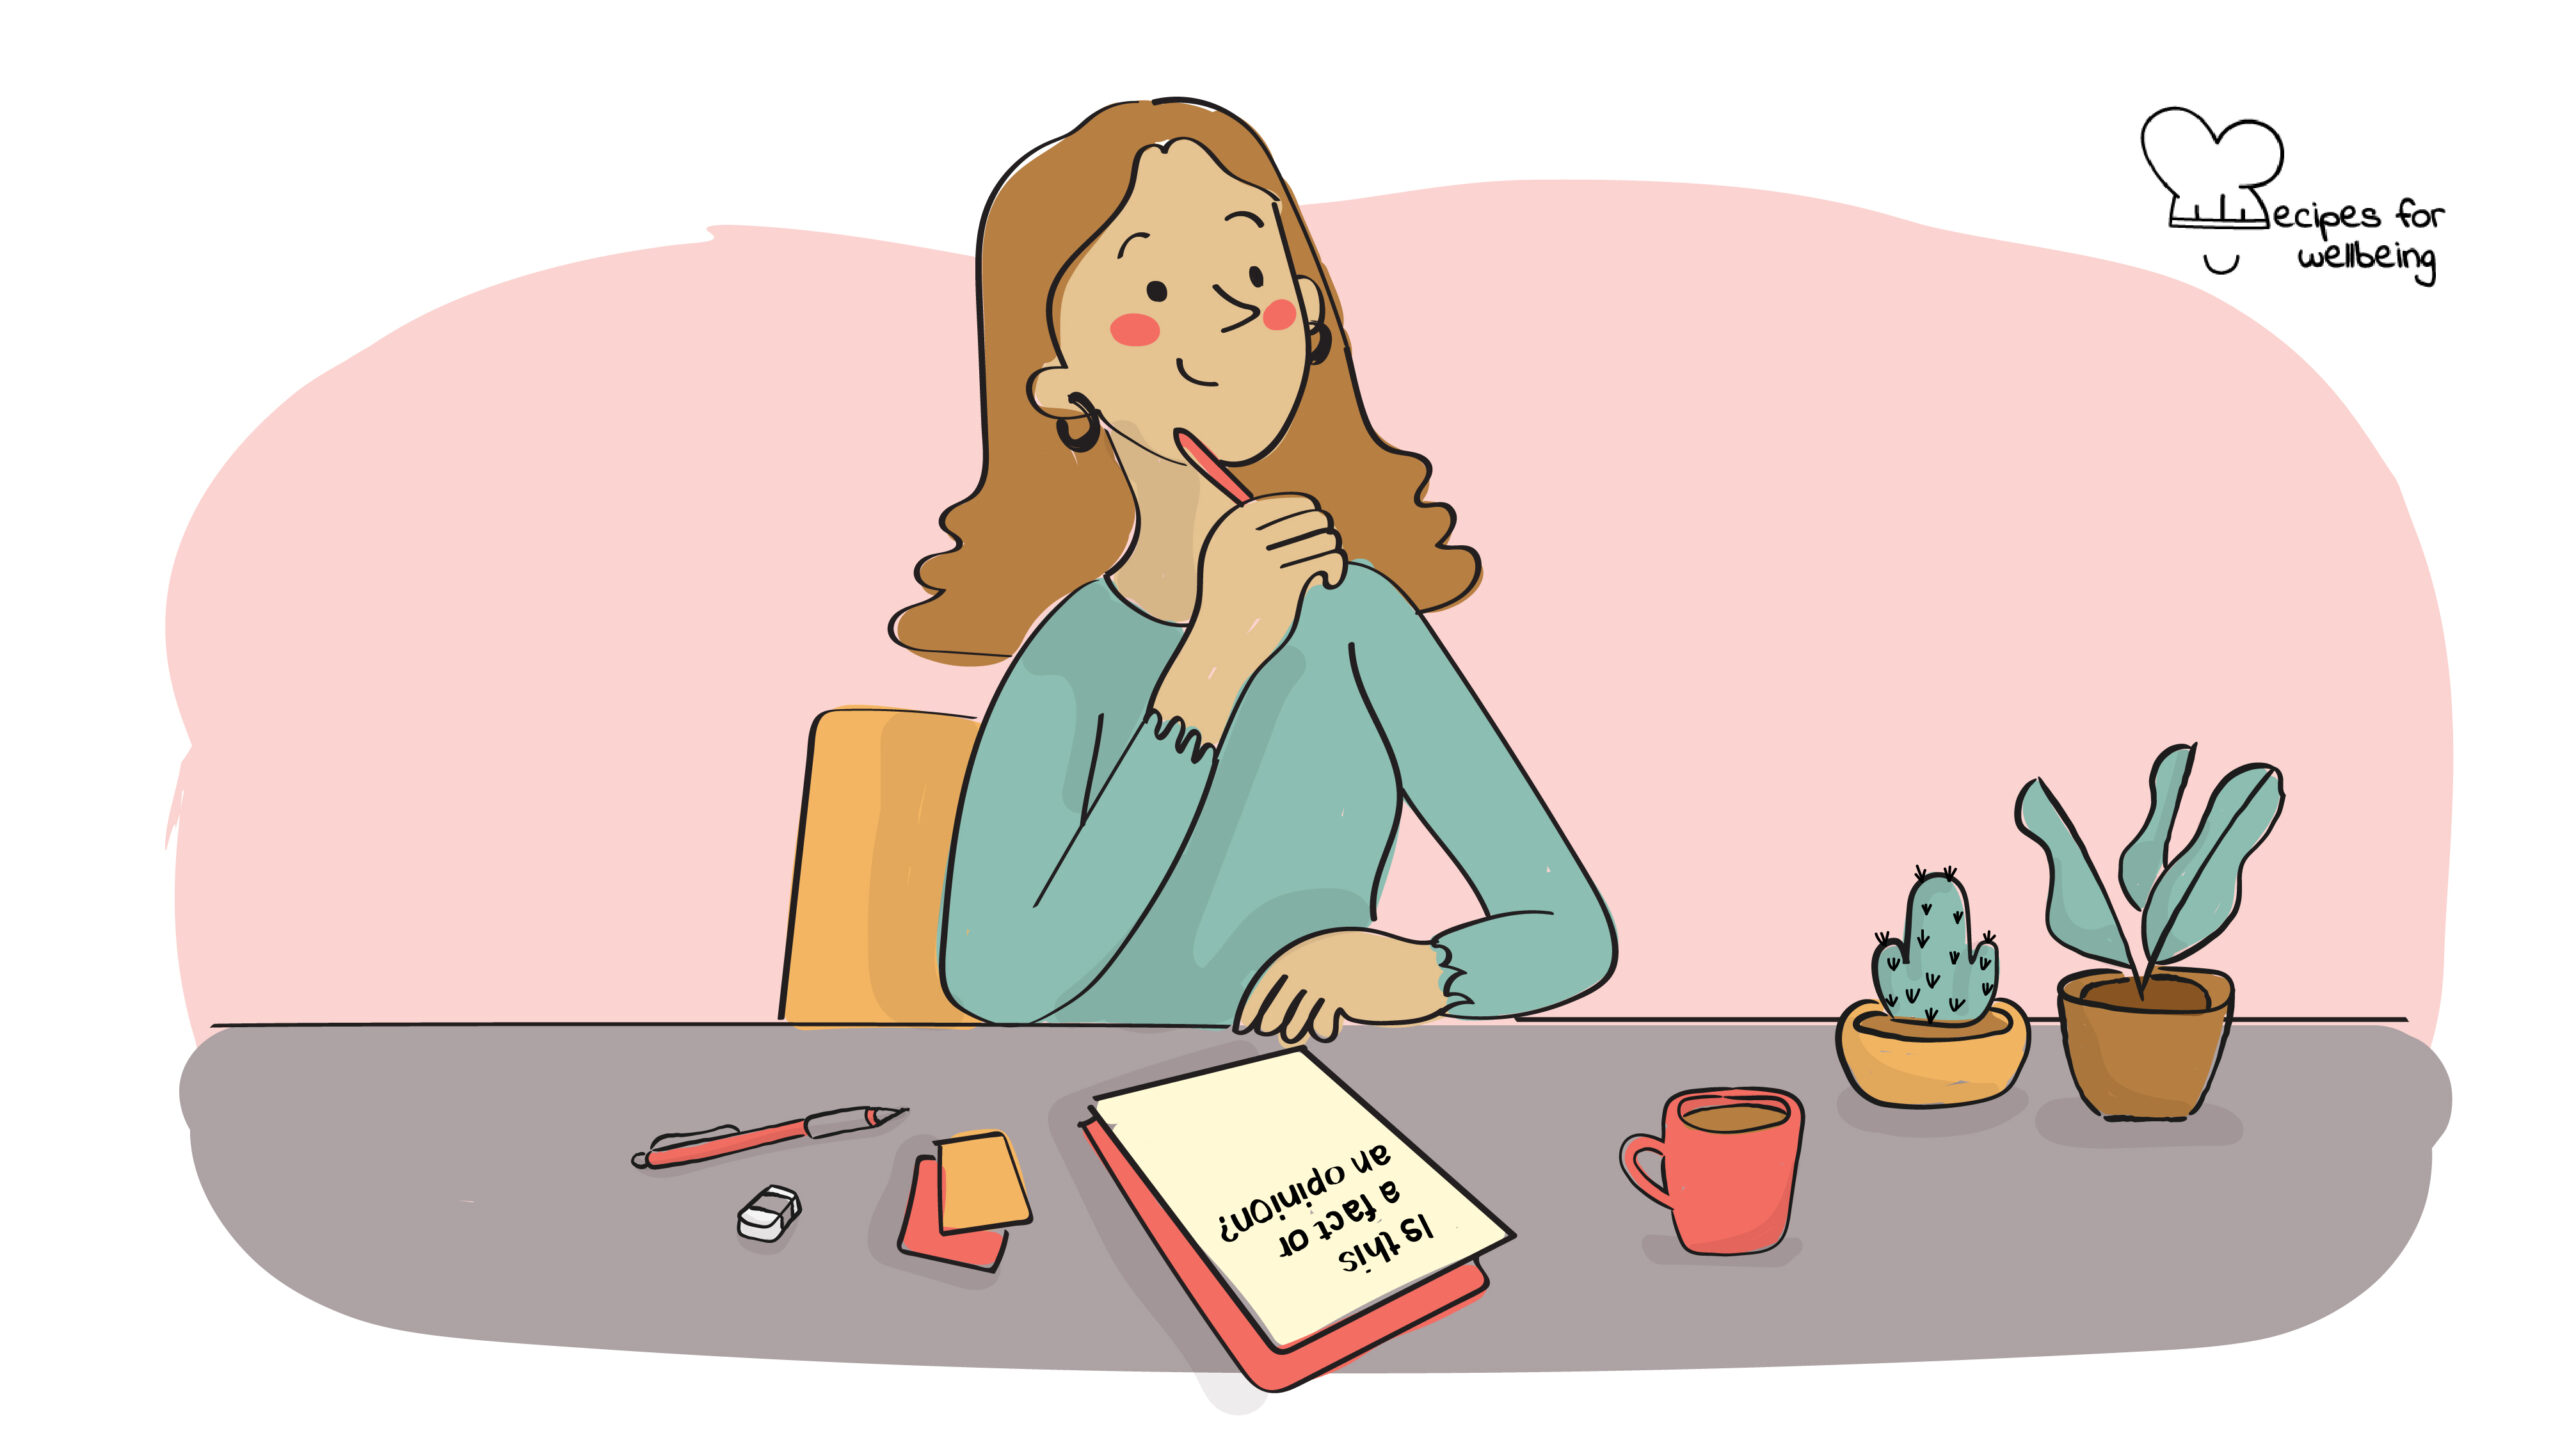 Illustration of a person sitting and reflecting in front of a powerful question. © Recipes for Wellbeing